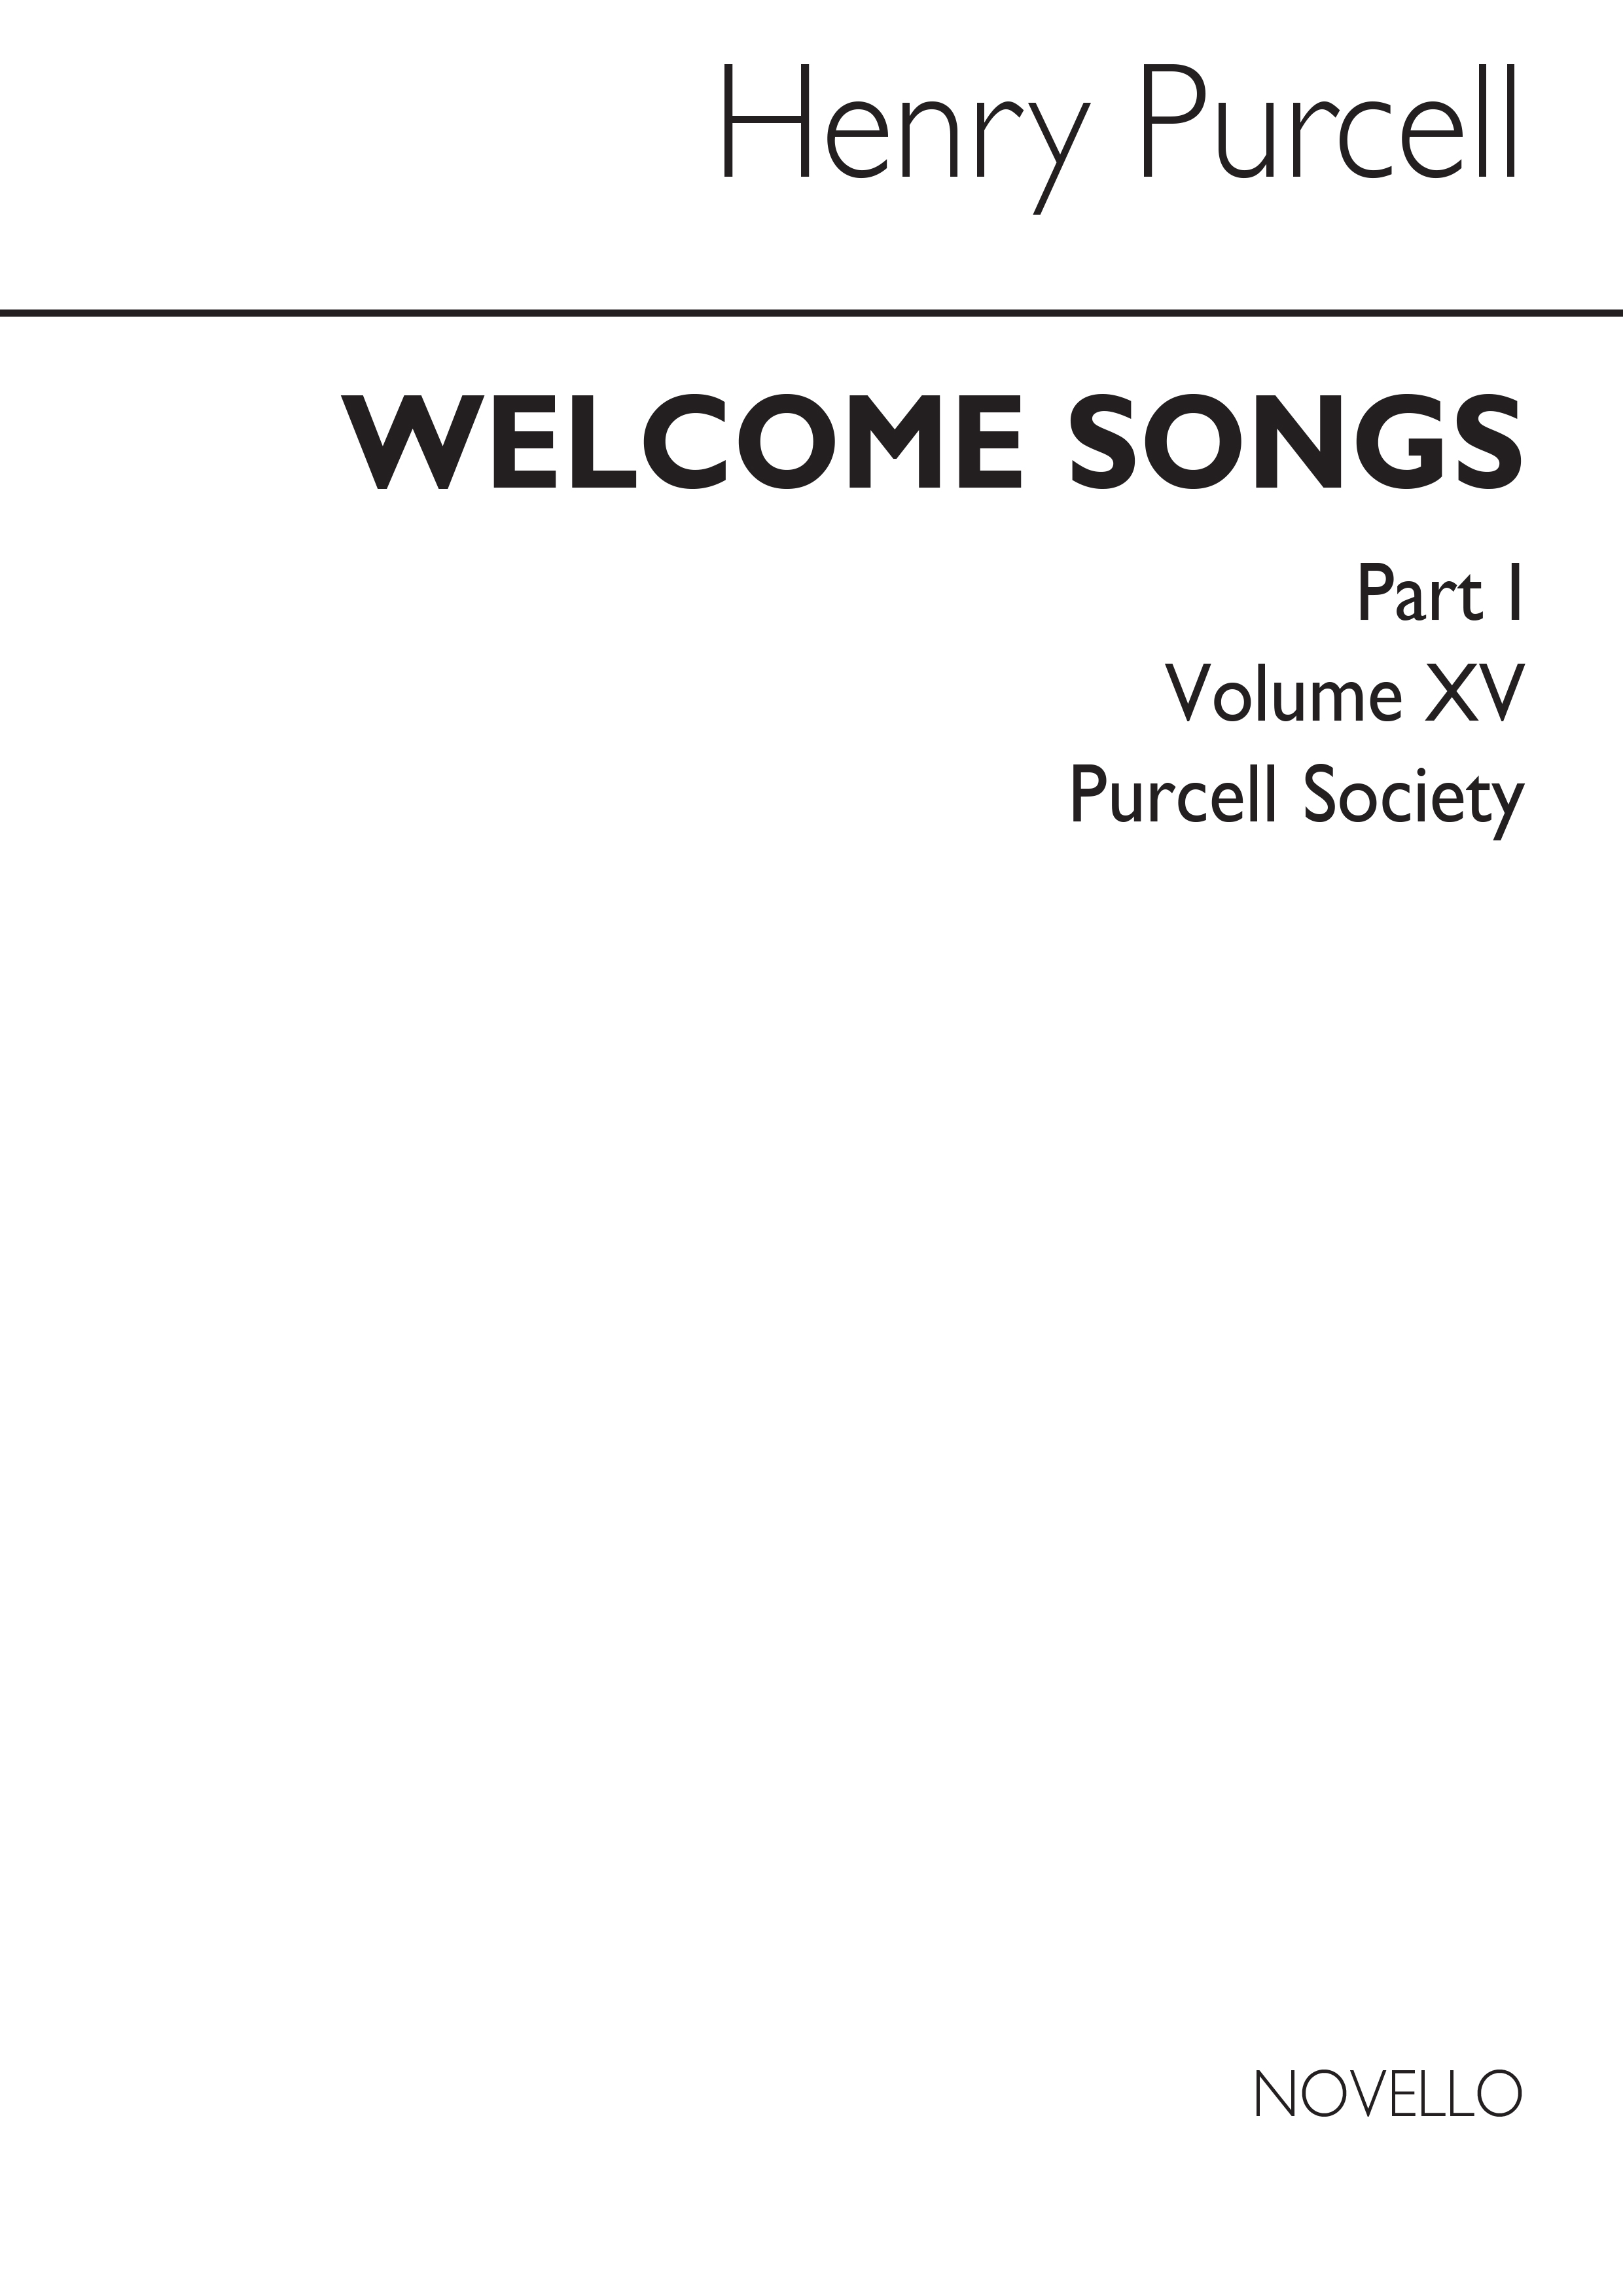 Purcell Society Volume 15 - Royal Welcome Songs (Original Engraving)